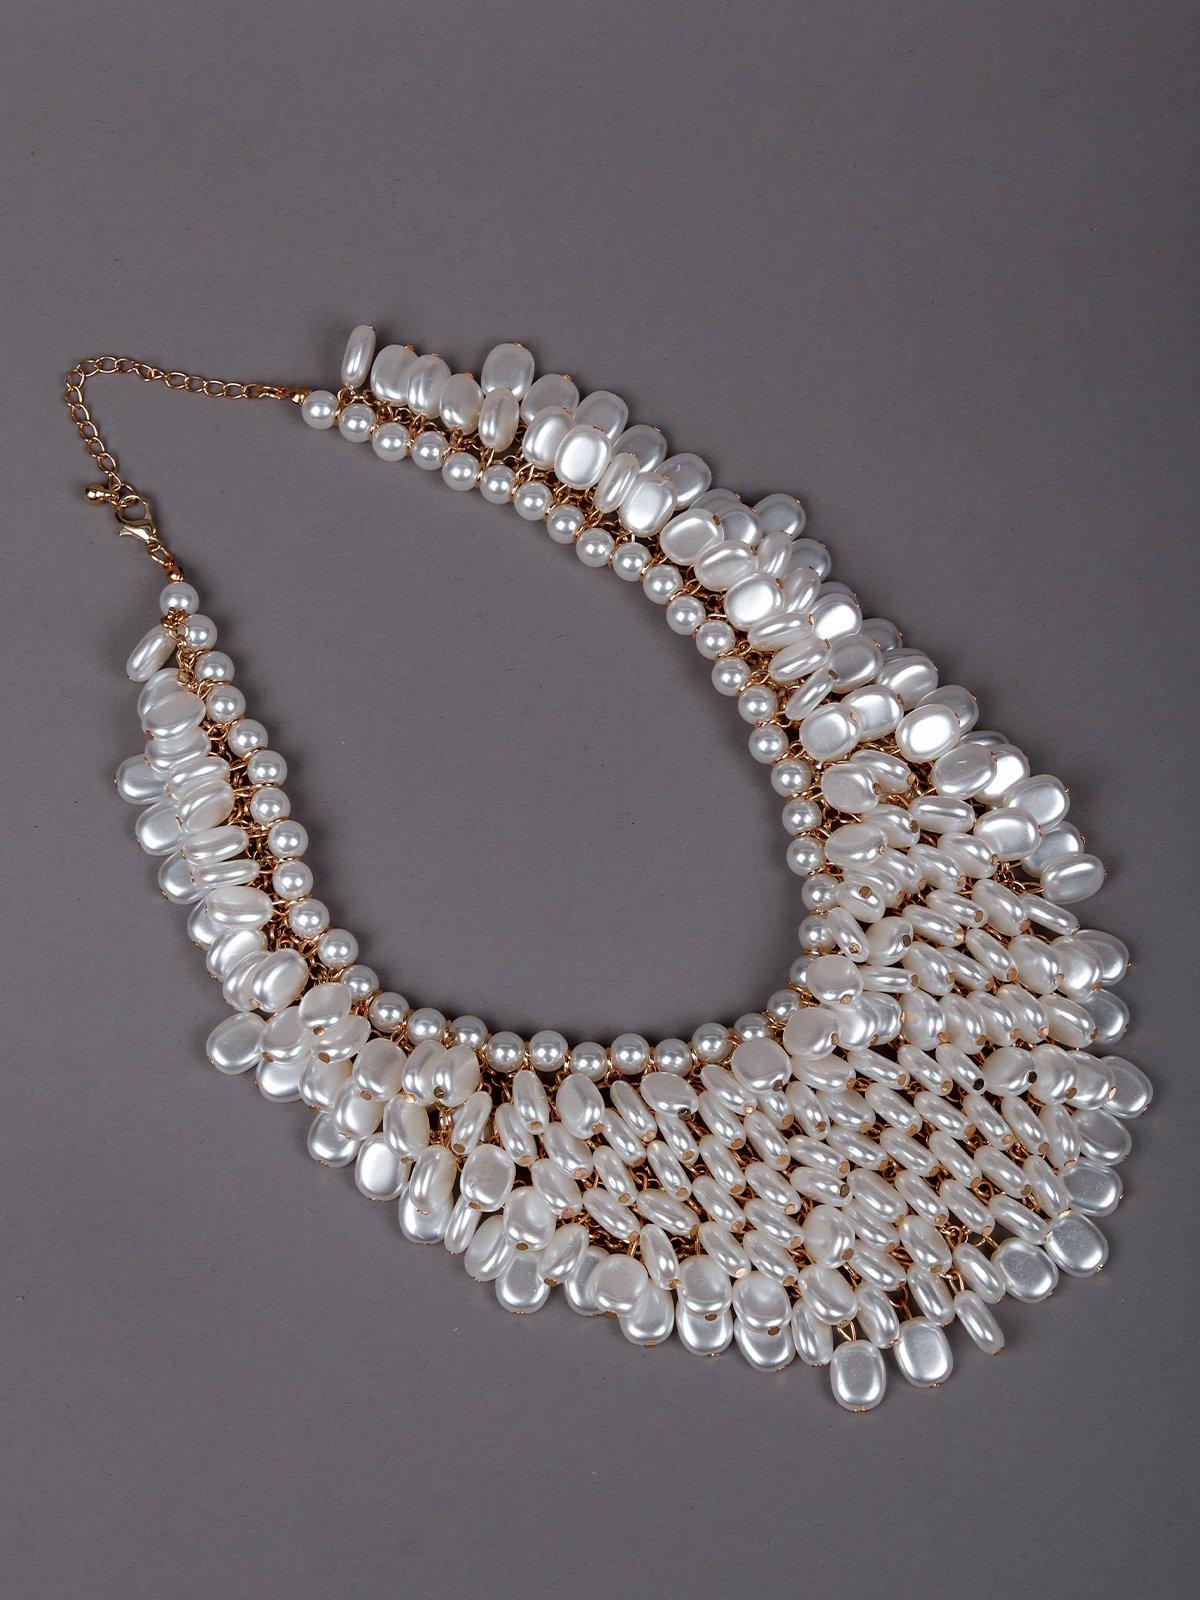 Women's Overflowing Glossy White Beaded Necklace. - Odette